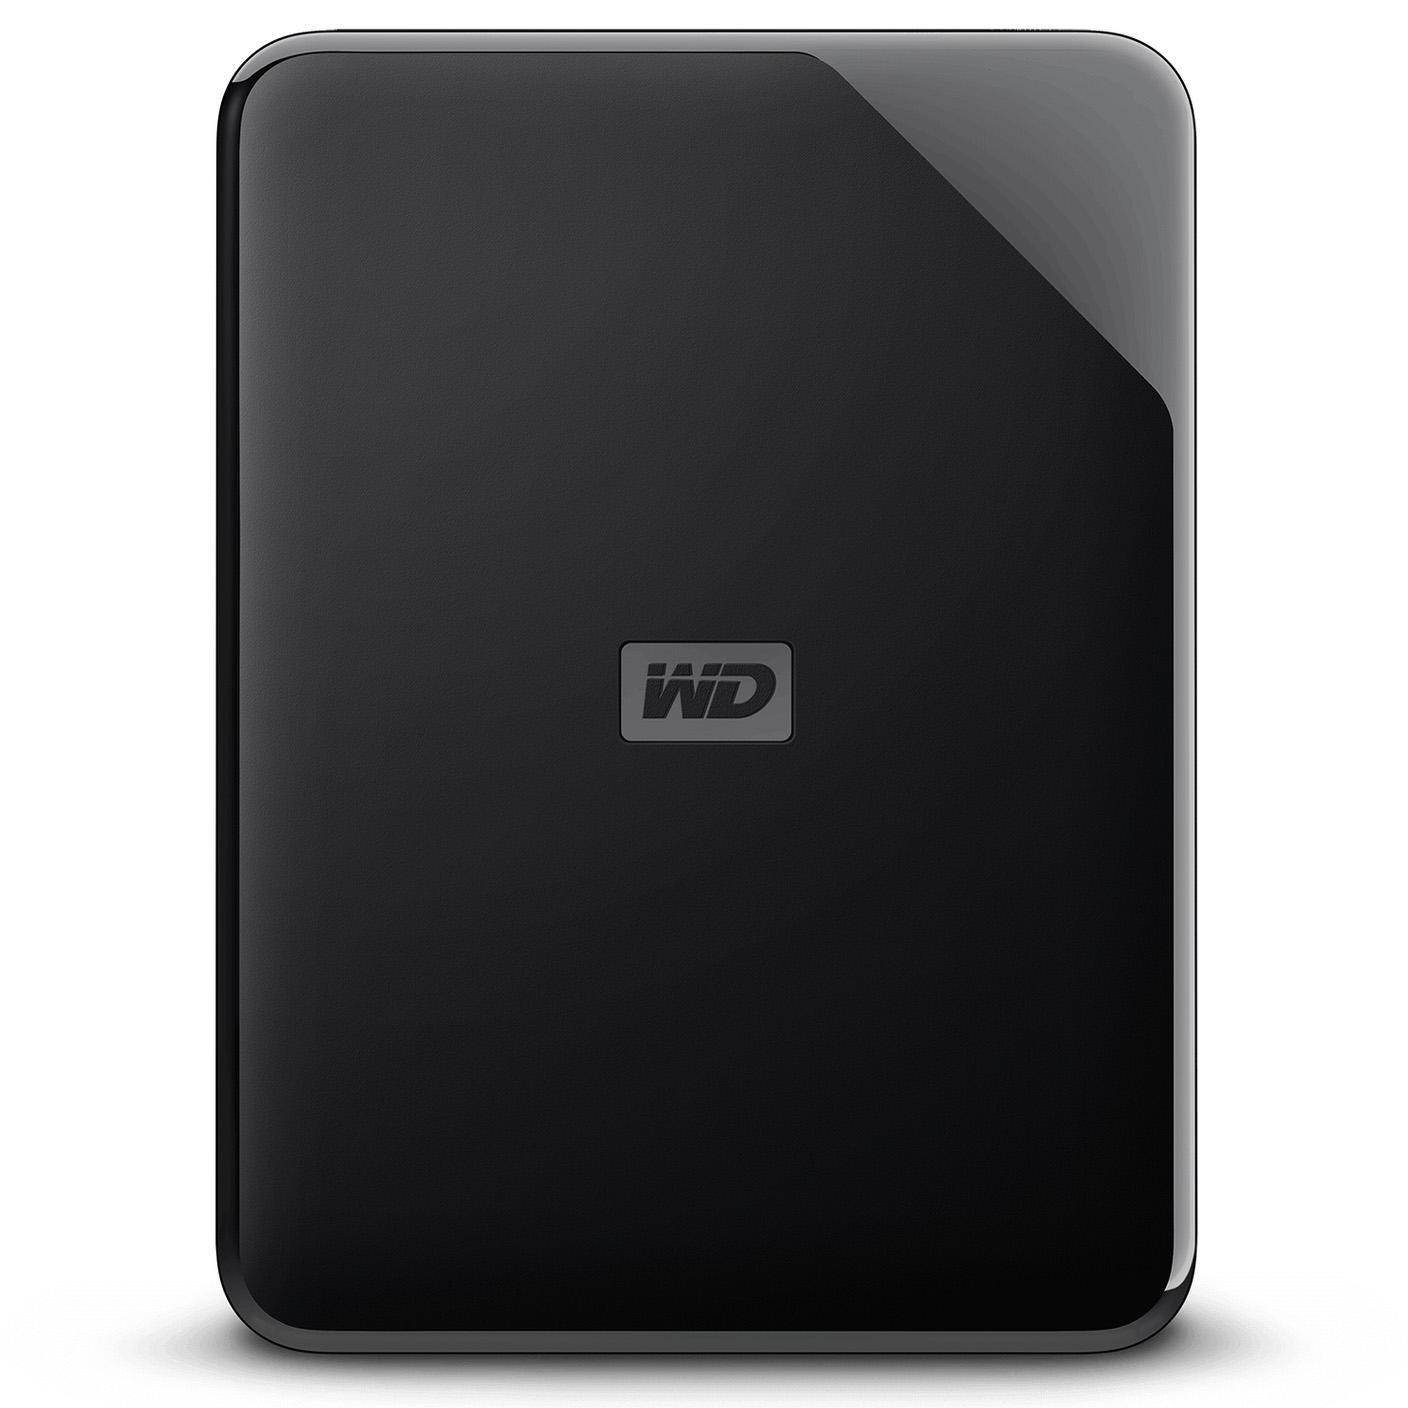 5TB WD Elements SE Refurbished Portable Hard Drive for $69.99 Shipped